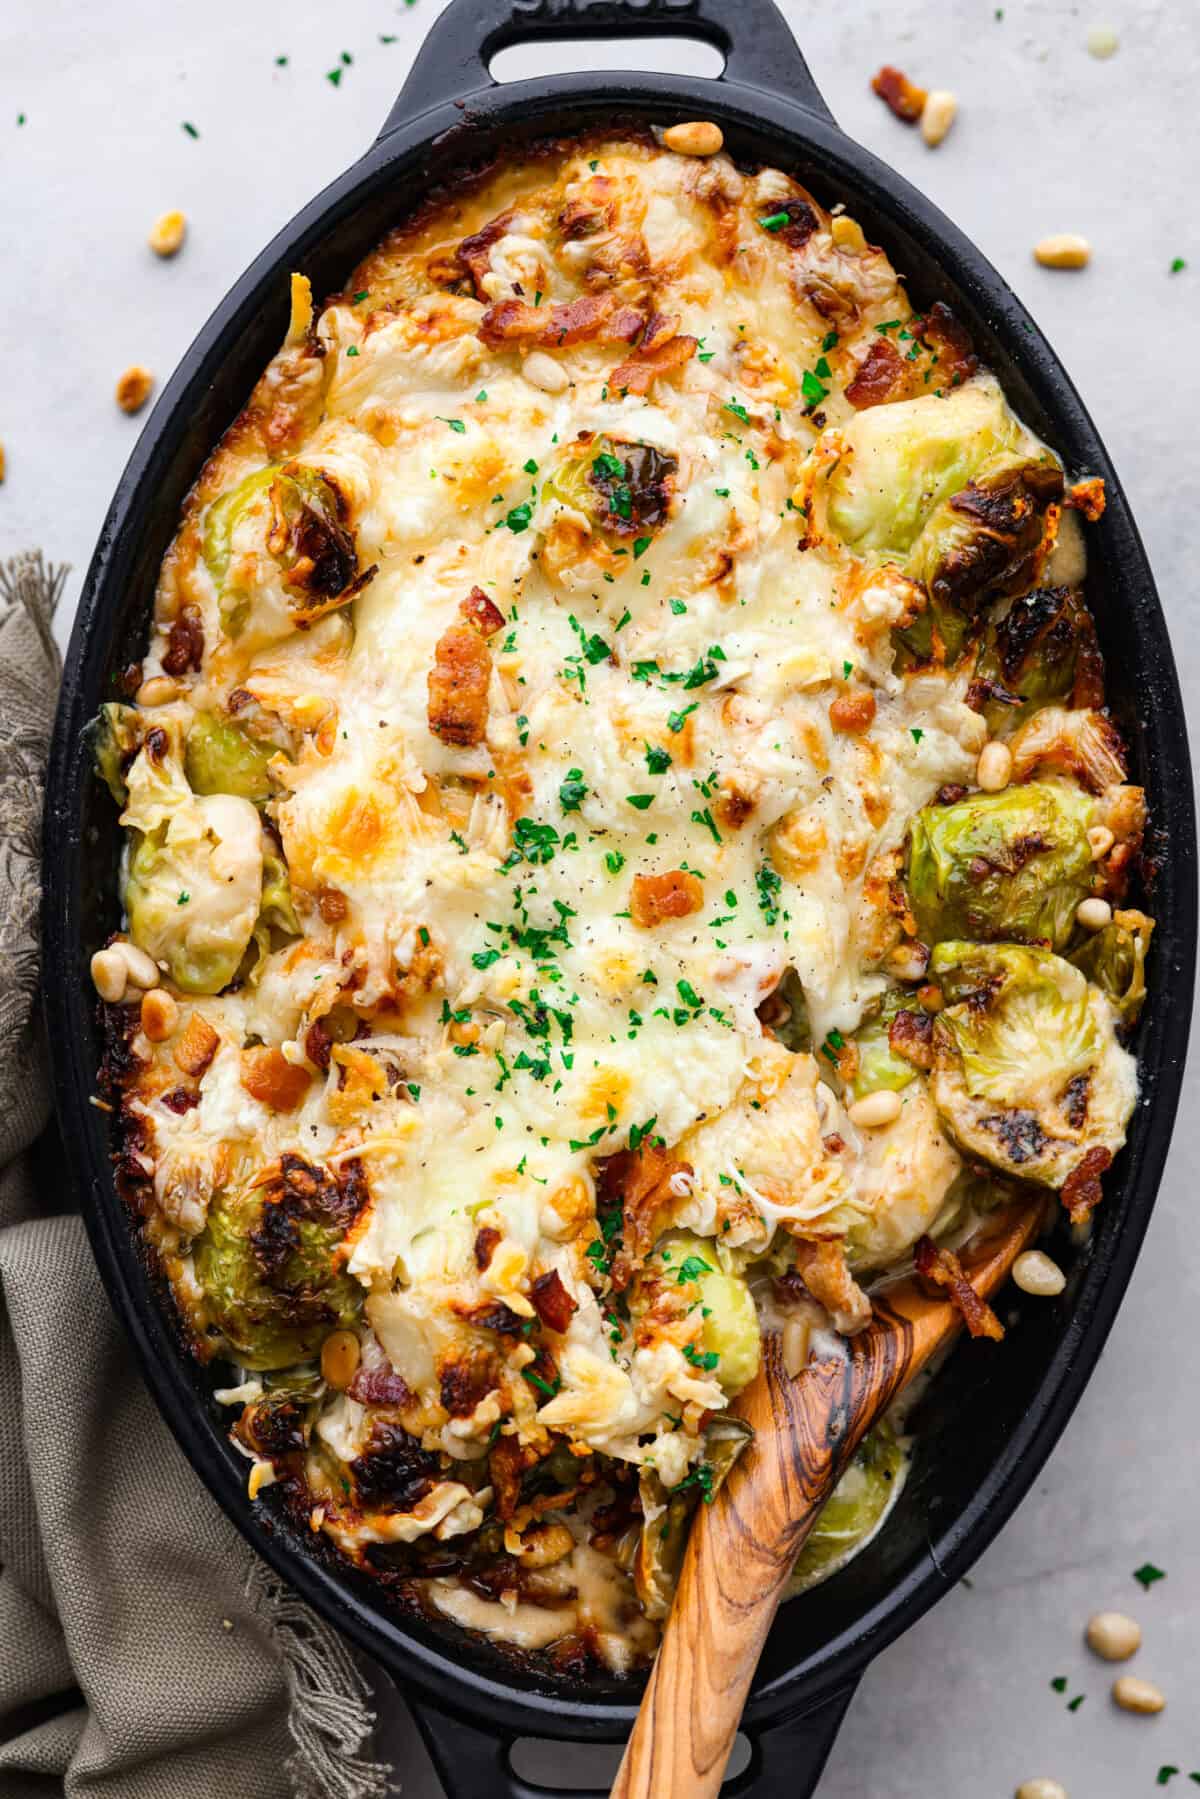 Top-down view of a cooked brussels sprout casserole in a black baking dish.